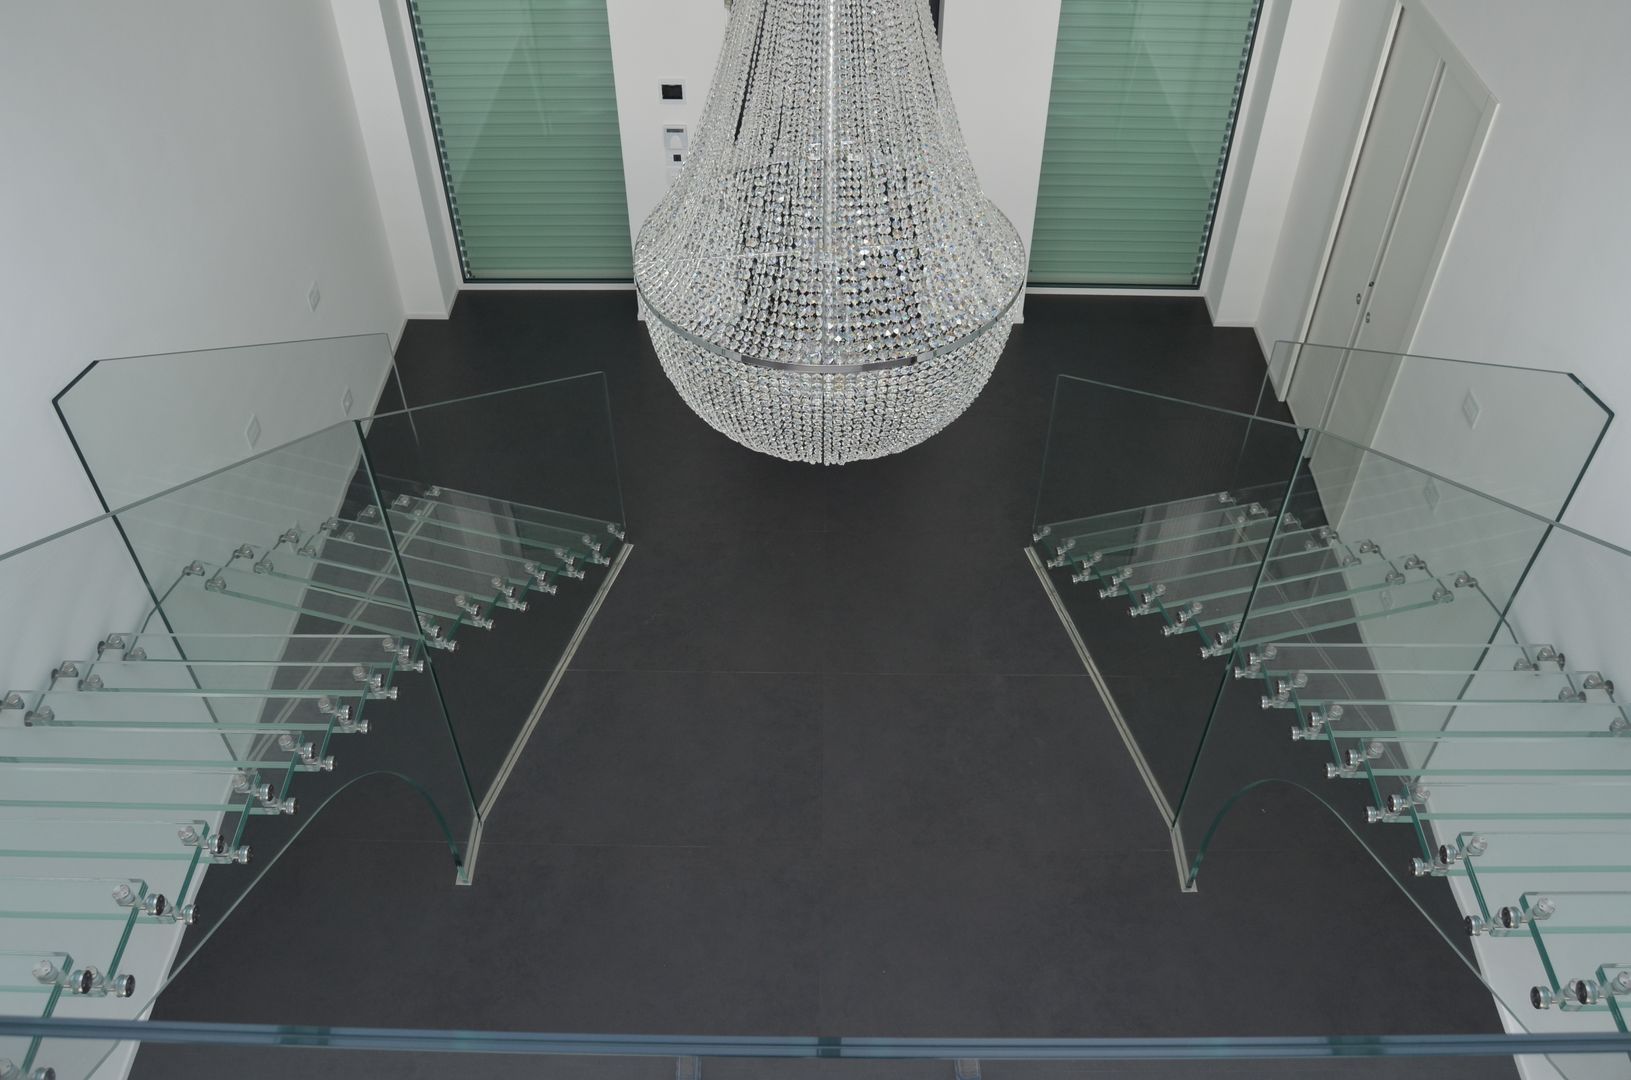 All glass stairs, Siller Treppen/Stairs/Scale Siller Treppen/Stairs/Scale Merdivenler Cam Merdivenler